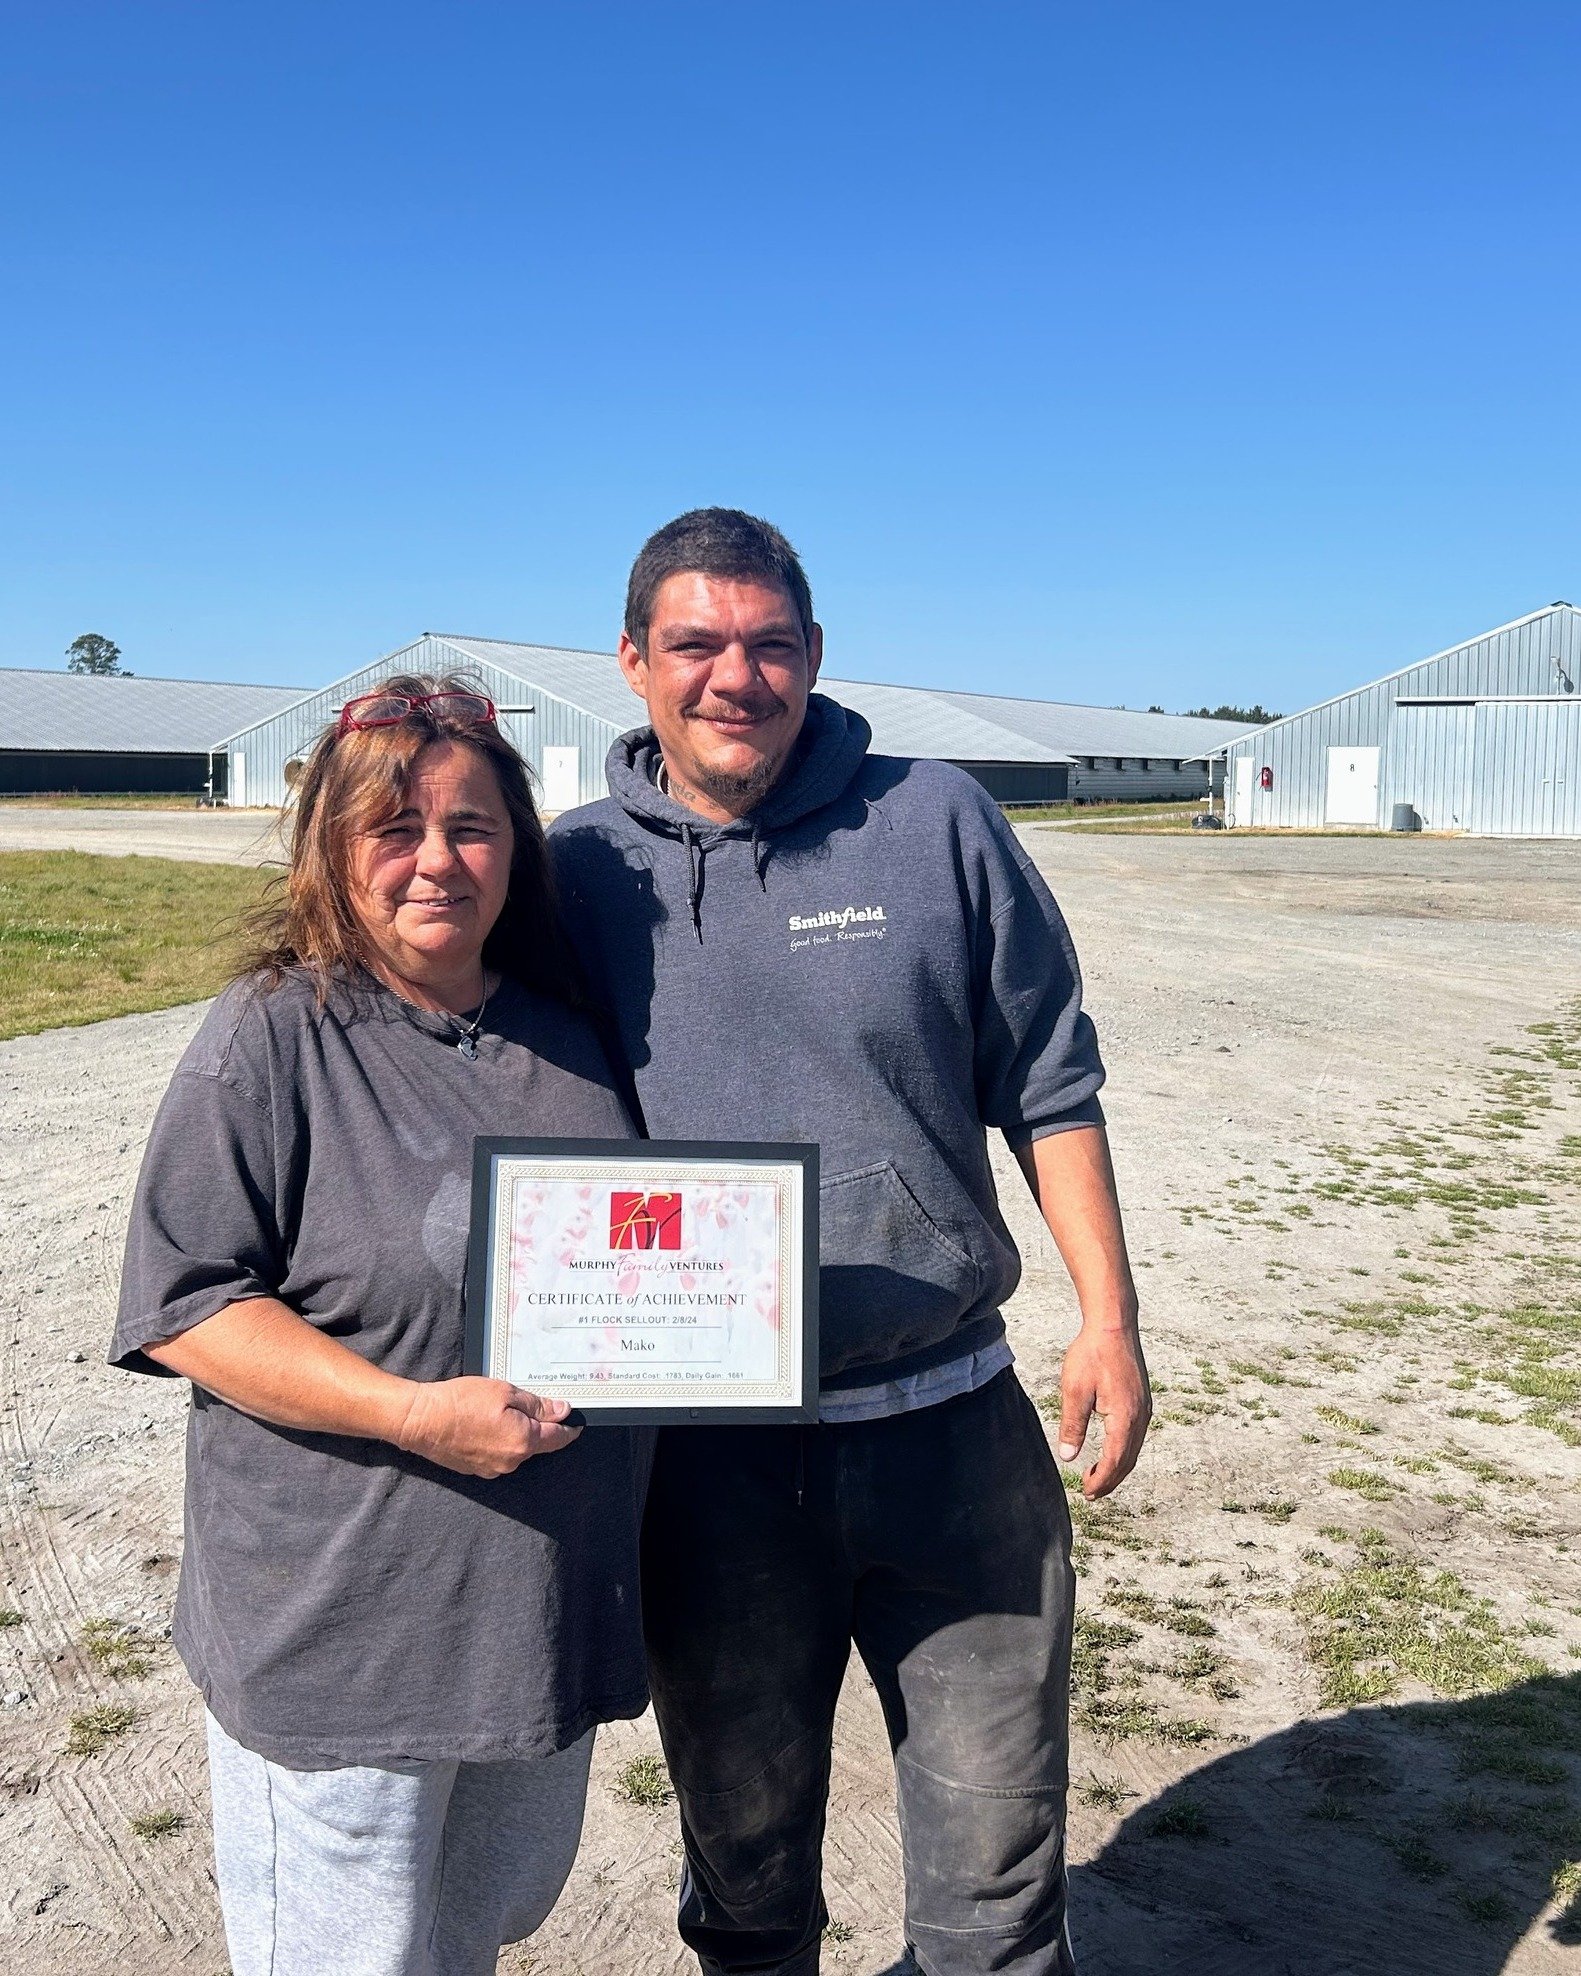 Congratulations to JM Wings and Mako Farms for winning first place in closeout for March and February! Caleb Whaley and Manager Trainee Cesar Rodriguez received the award on behalf of JM Wings for the March closeout, while Mako Chicken Farm Manager L